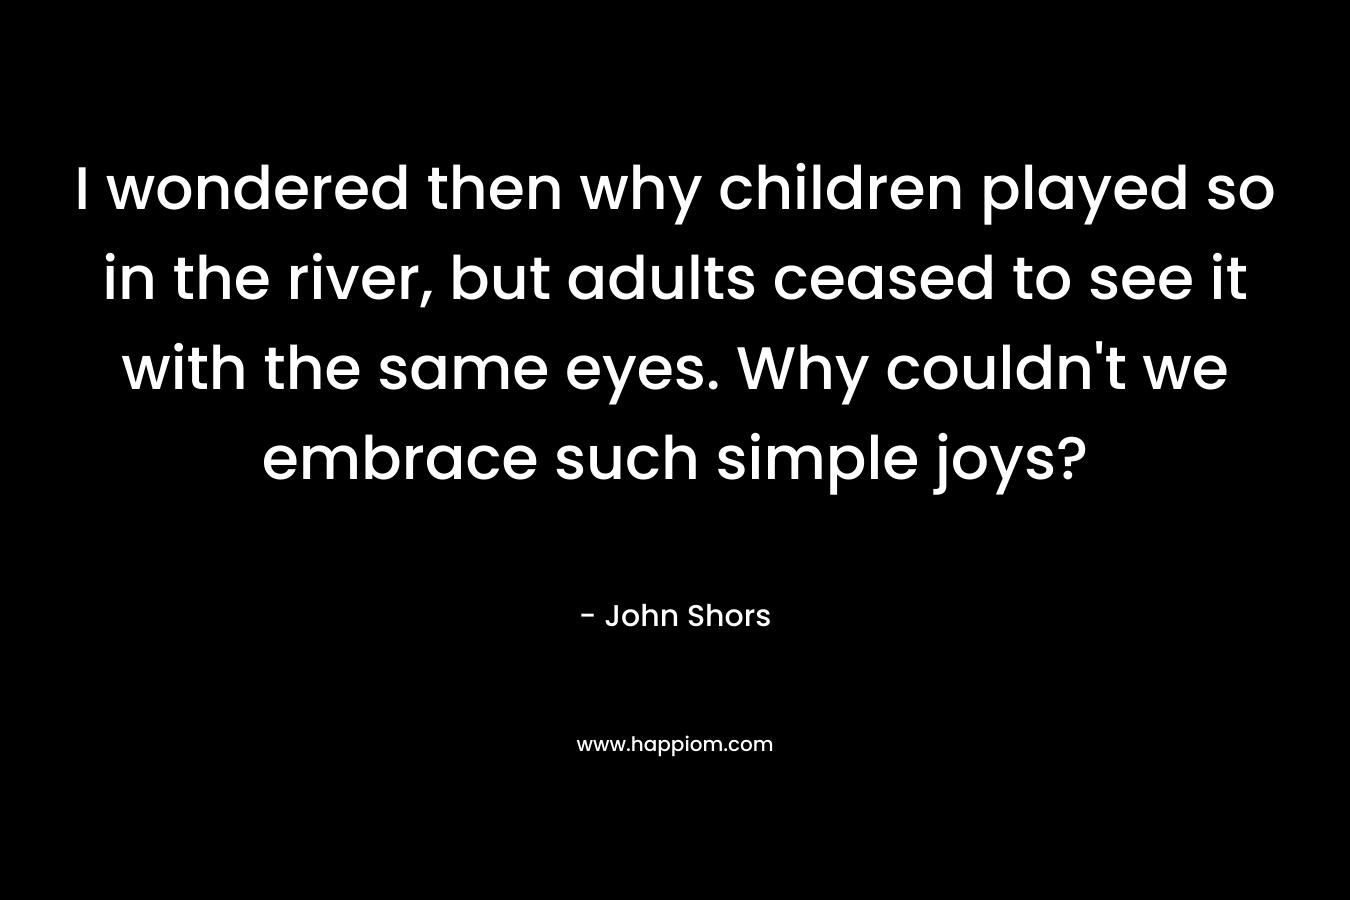 I wondered then why children played so in the river, but adults ceased to see it with the same eyes. Why couldn't we embrace such simple joys?